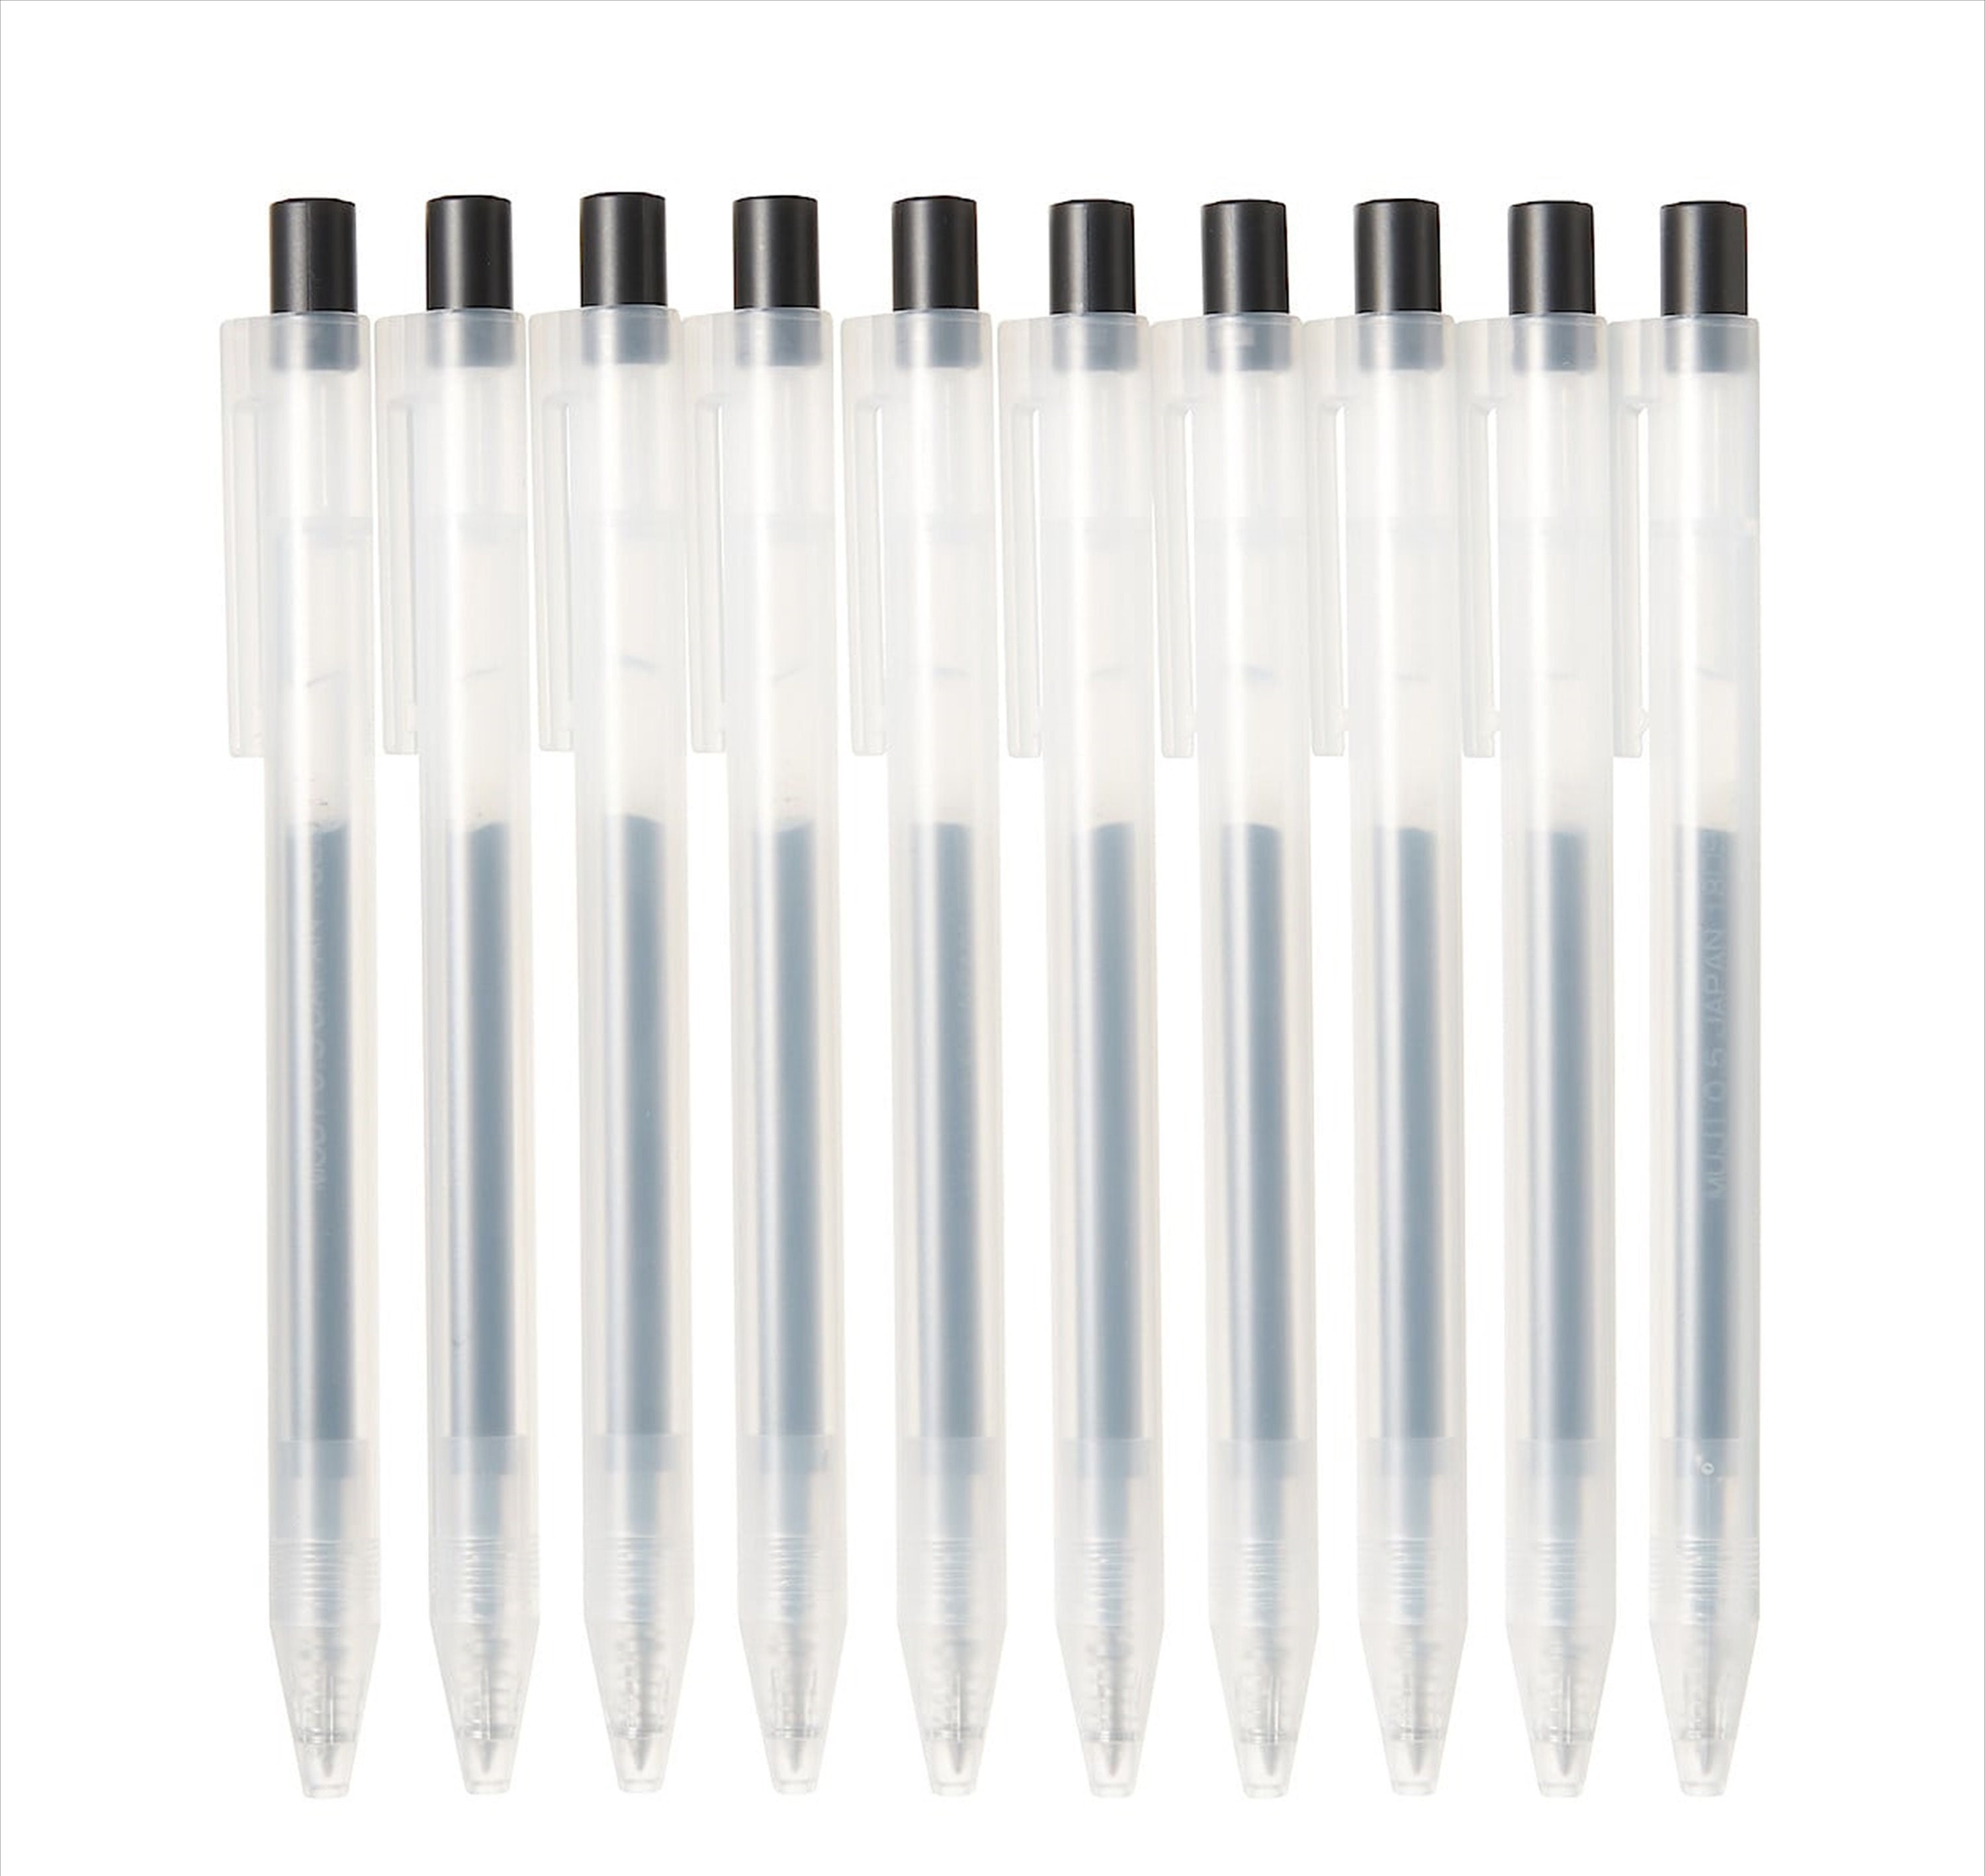  Muji Gel Ink Ball Point Pen, Black, 0.38mm, Pack of 3 (Japan  Import) : Office Products